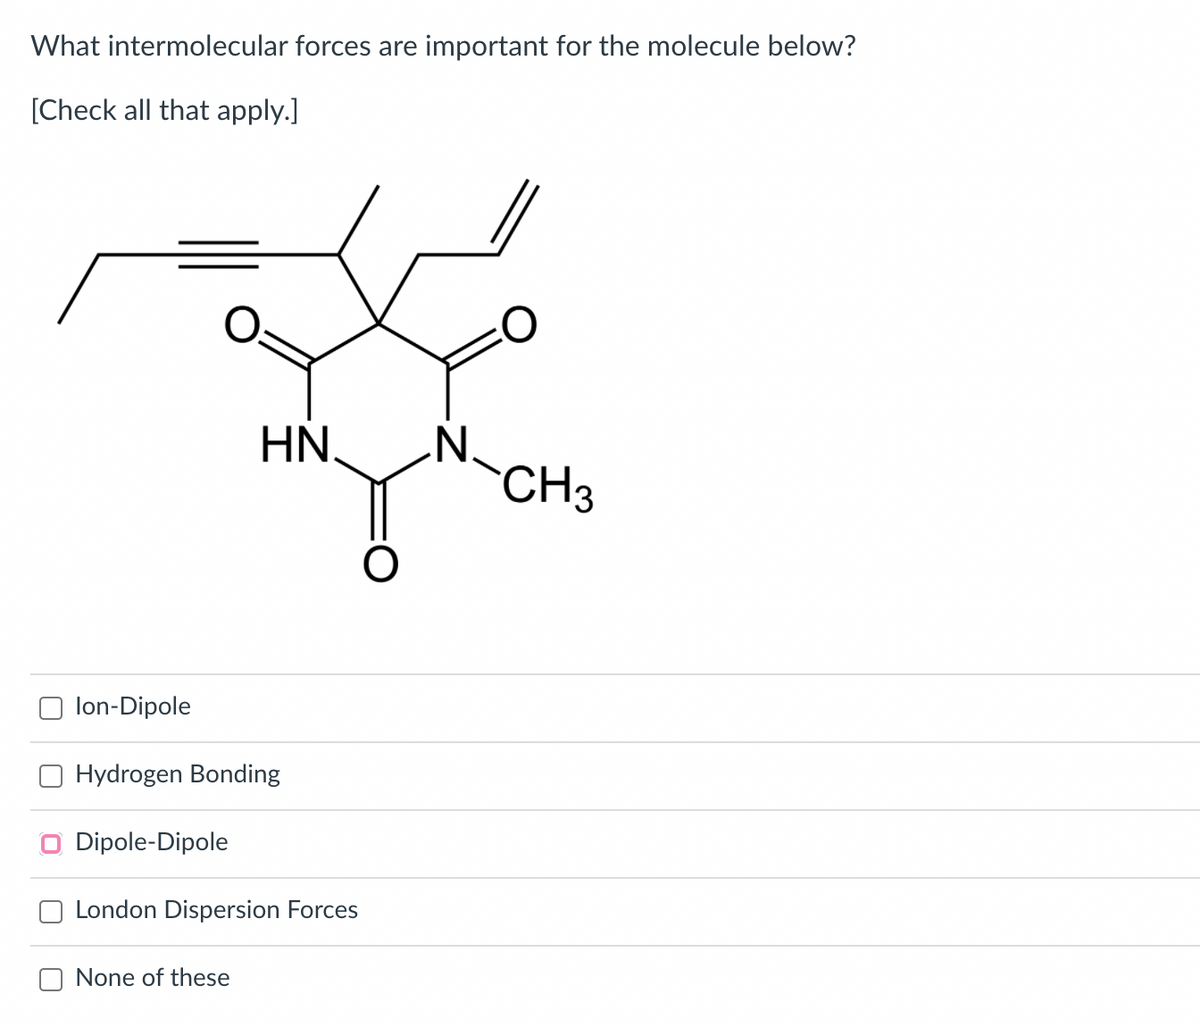 What intermolecular forces are important for the molecule below?
[Check all that apply.]
HN.
CH3
lon-Dipole
Hydrogen Bonding
Dipole-Dipole
London Dispersion Forces
None of these
